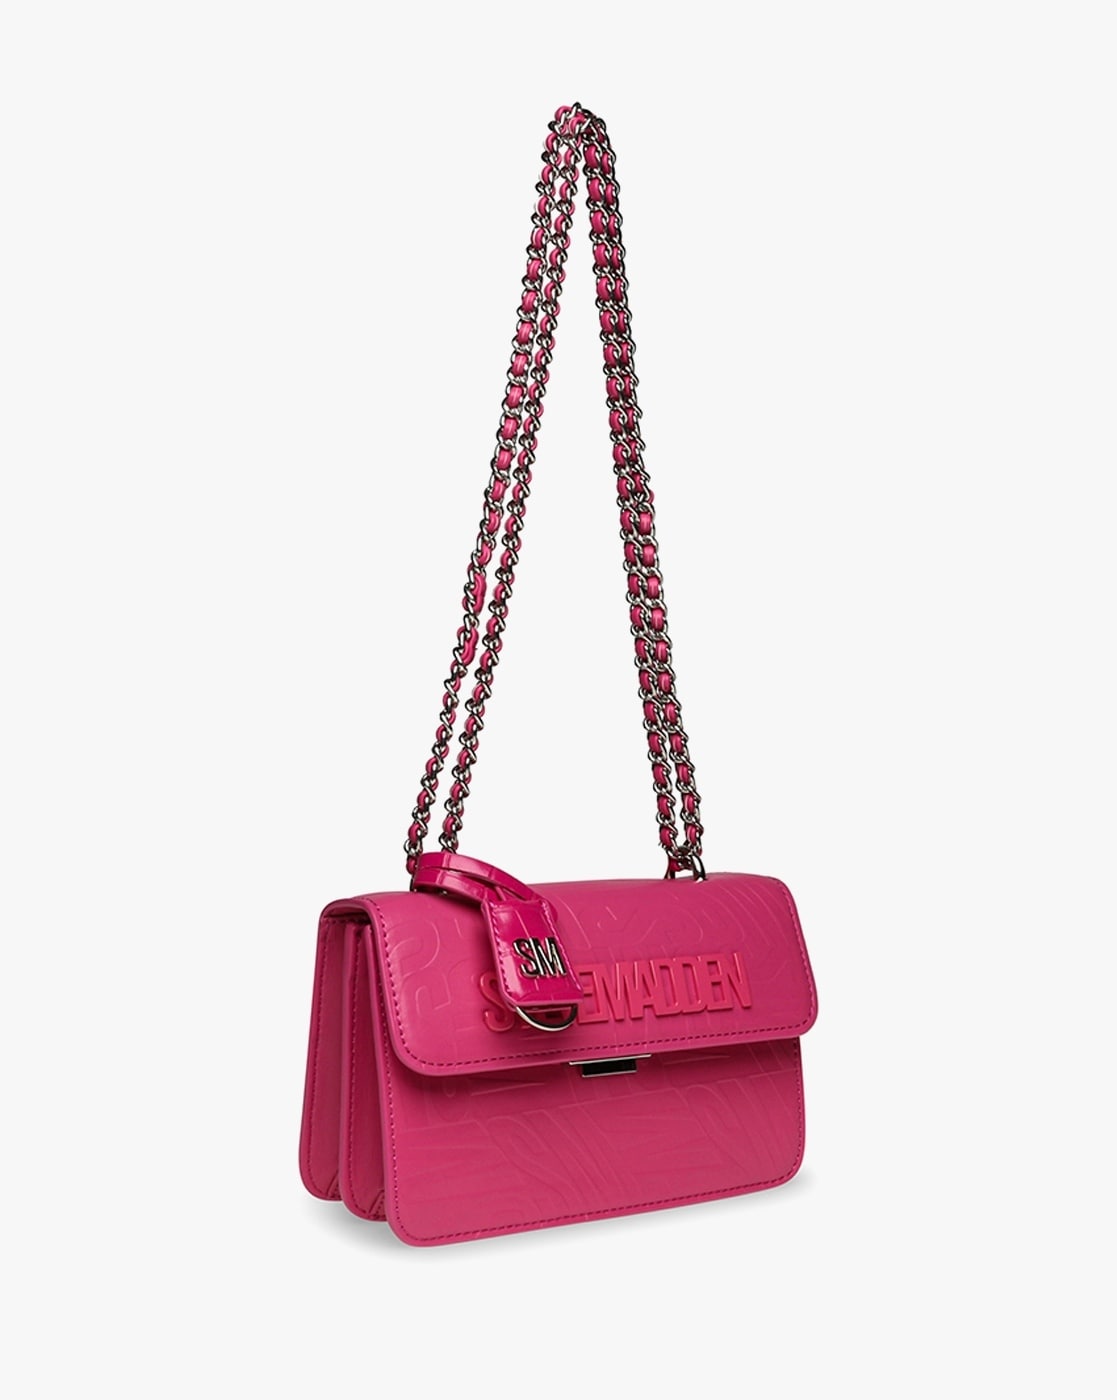 Steve Madden India | Buy latest bags for Women | Shop for satchels, totes,  crossbody bags & backpacks